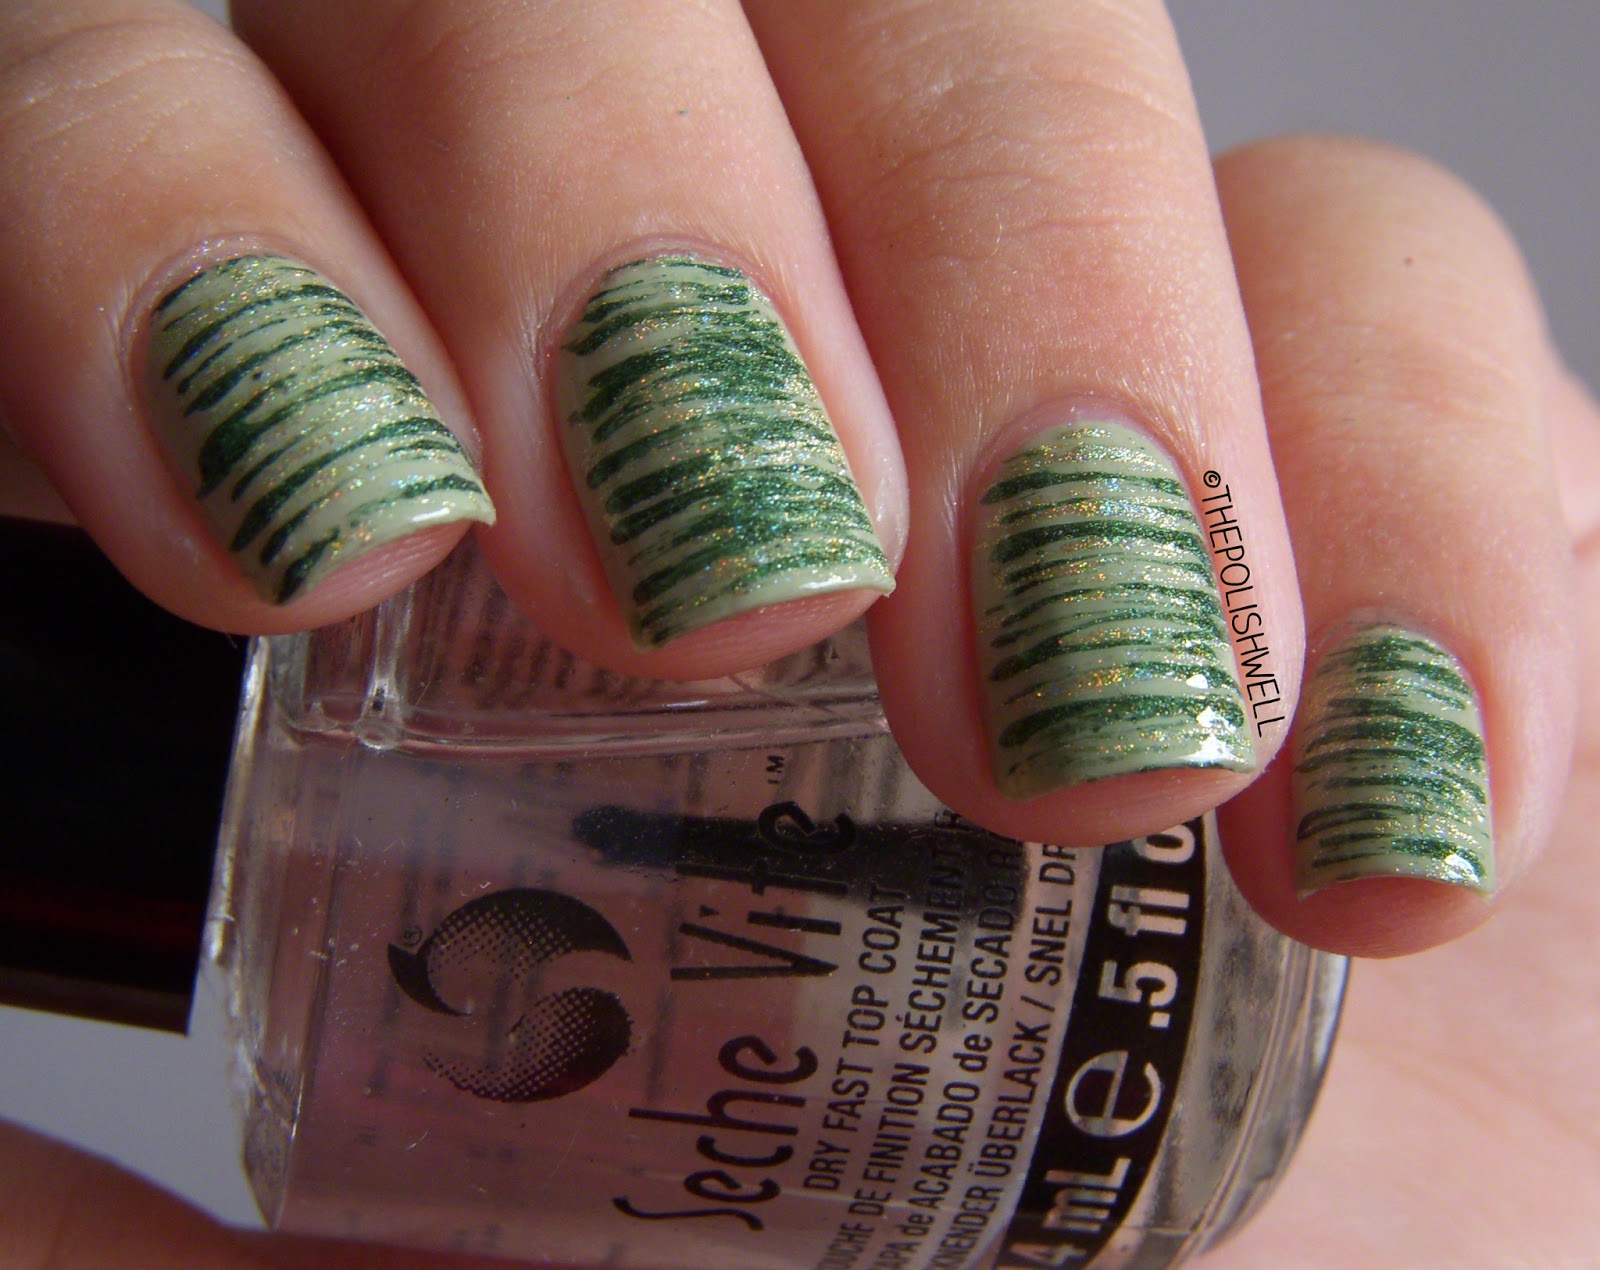 1. St. Patrick's Day Nail Art Designs - wide 5